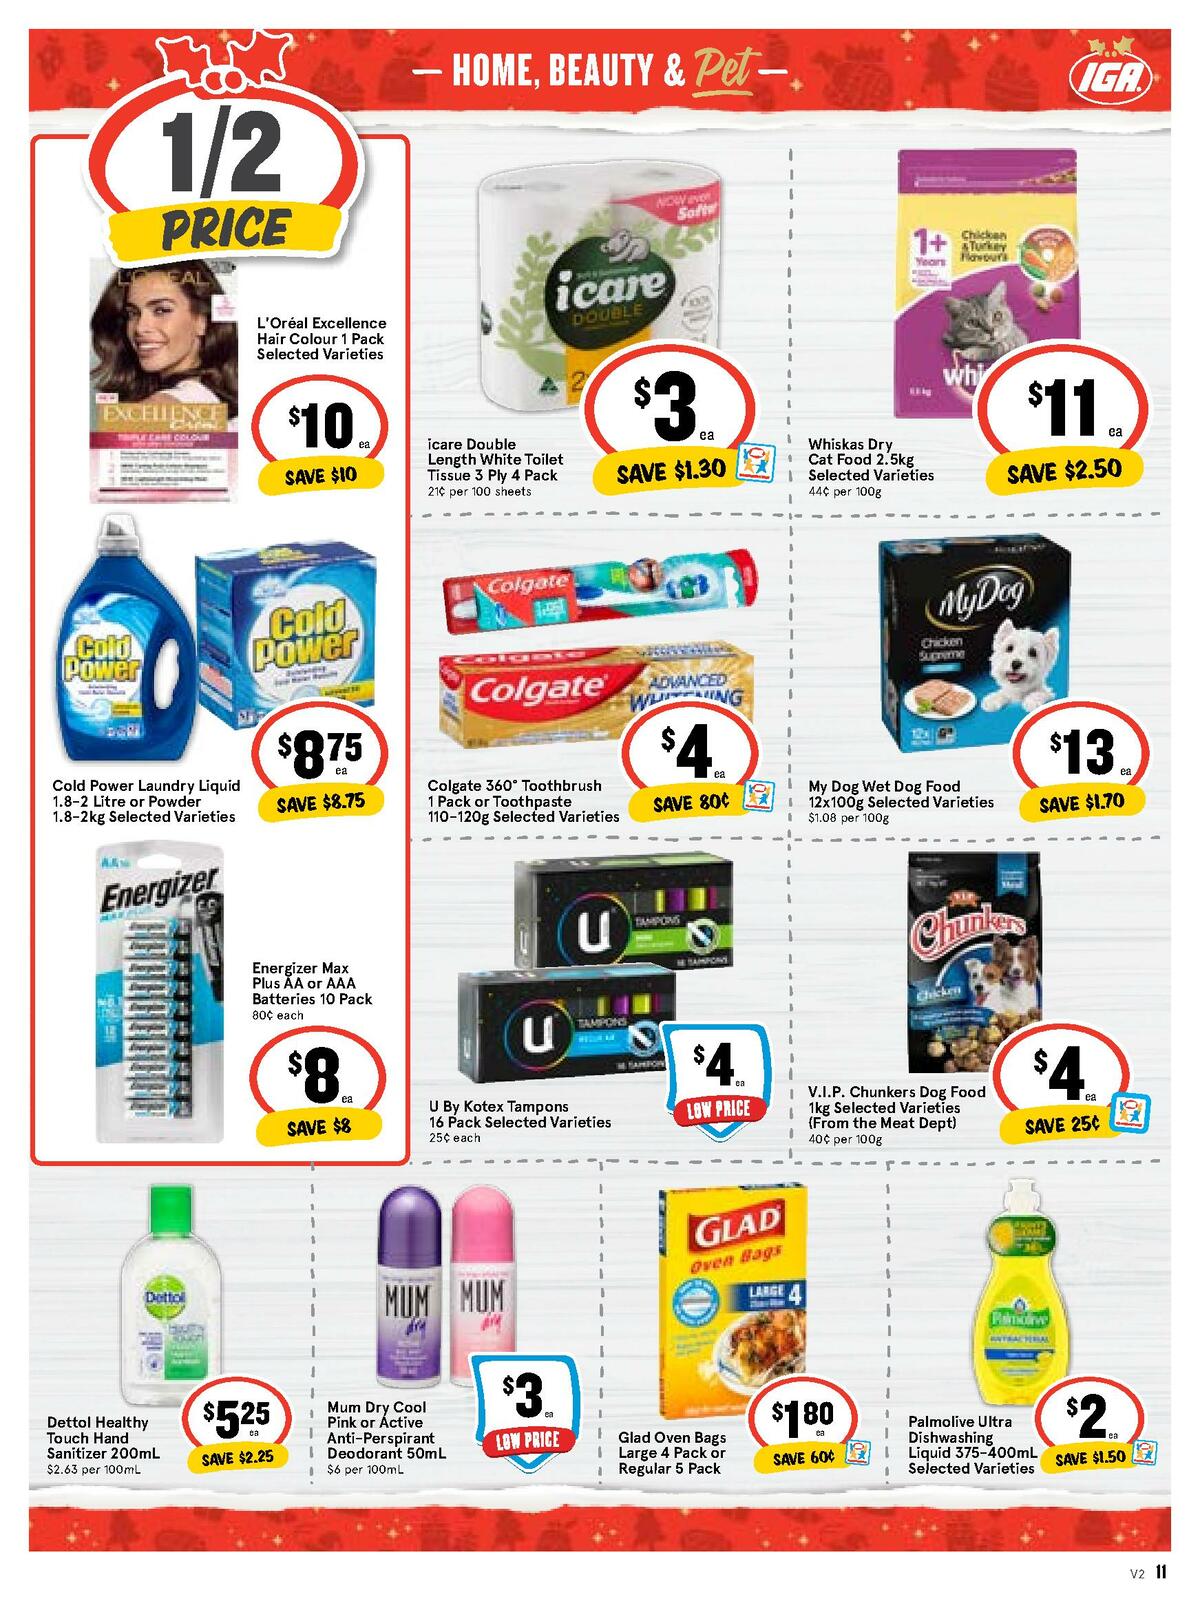 IGA Catalogues from 23 December